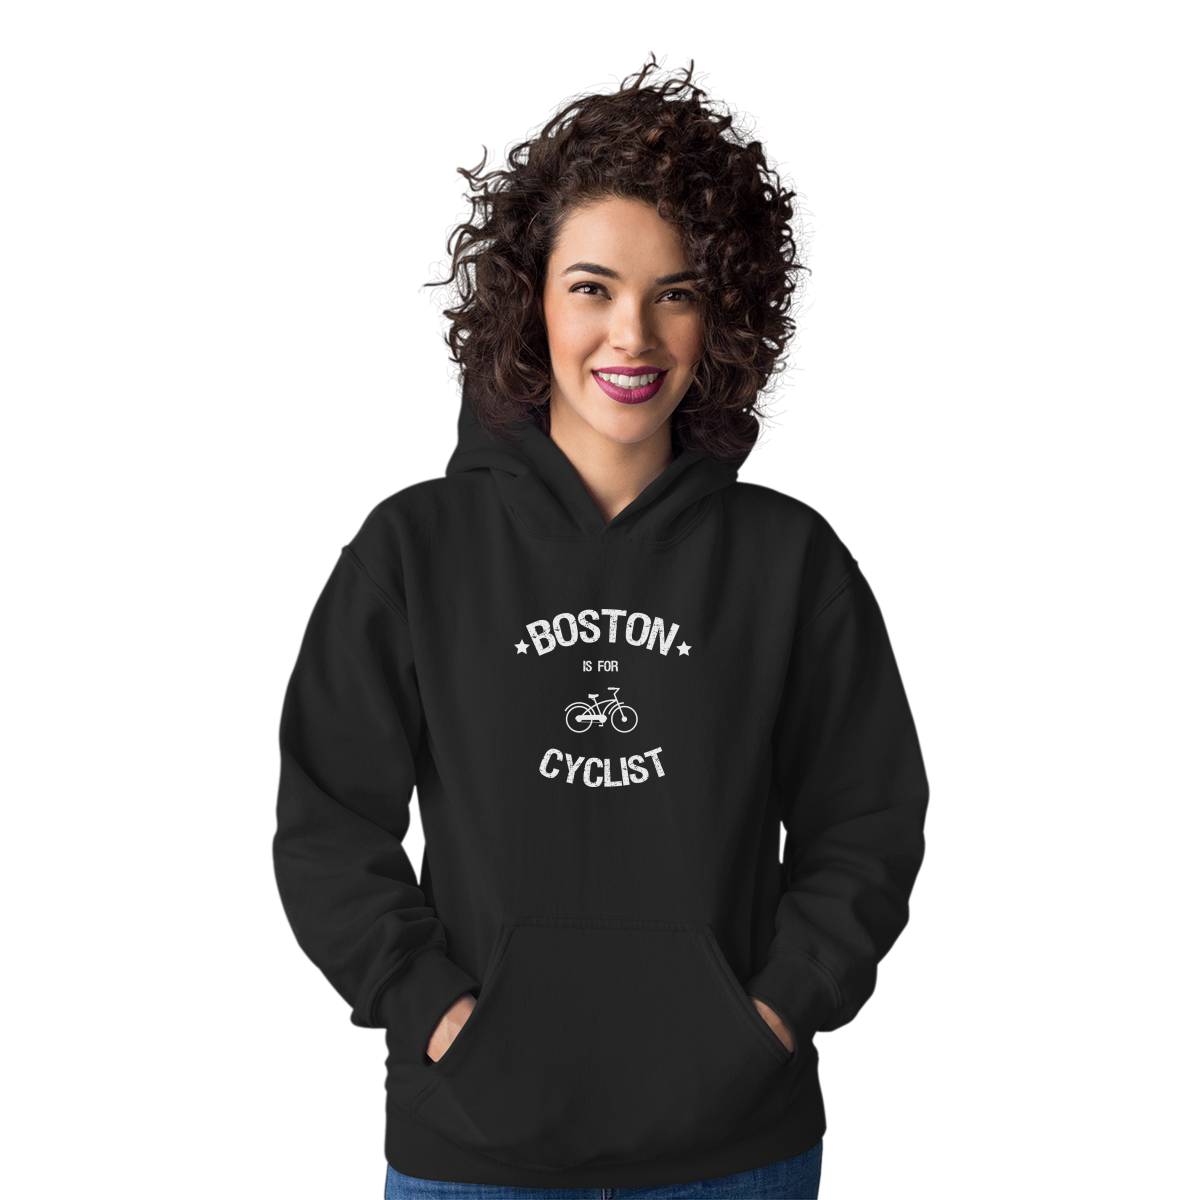 Boston Is For Cyclists Unisex Hoodie | Black